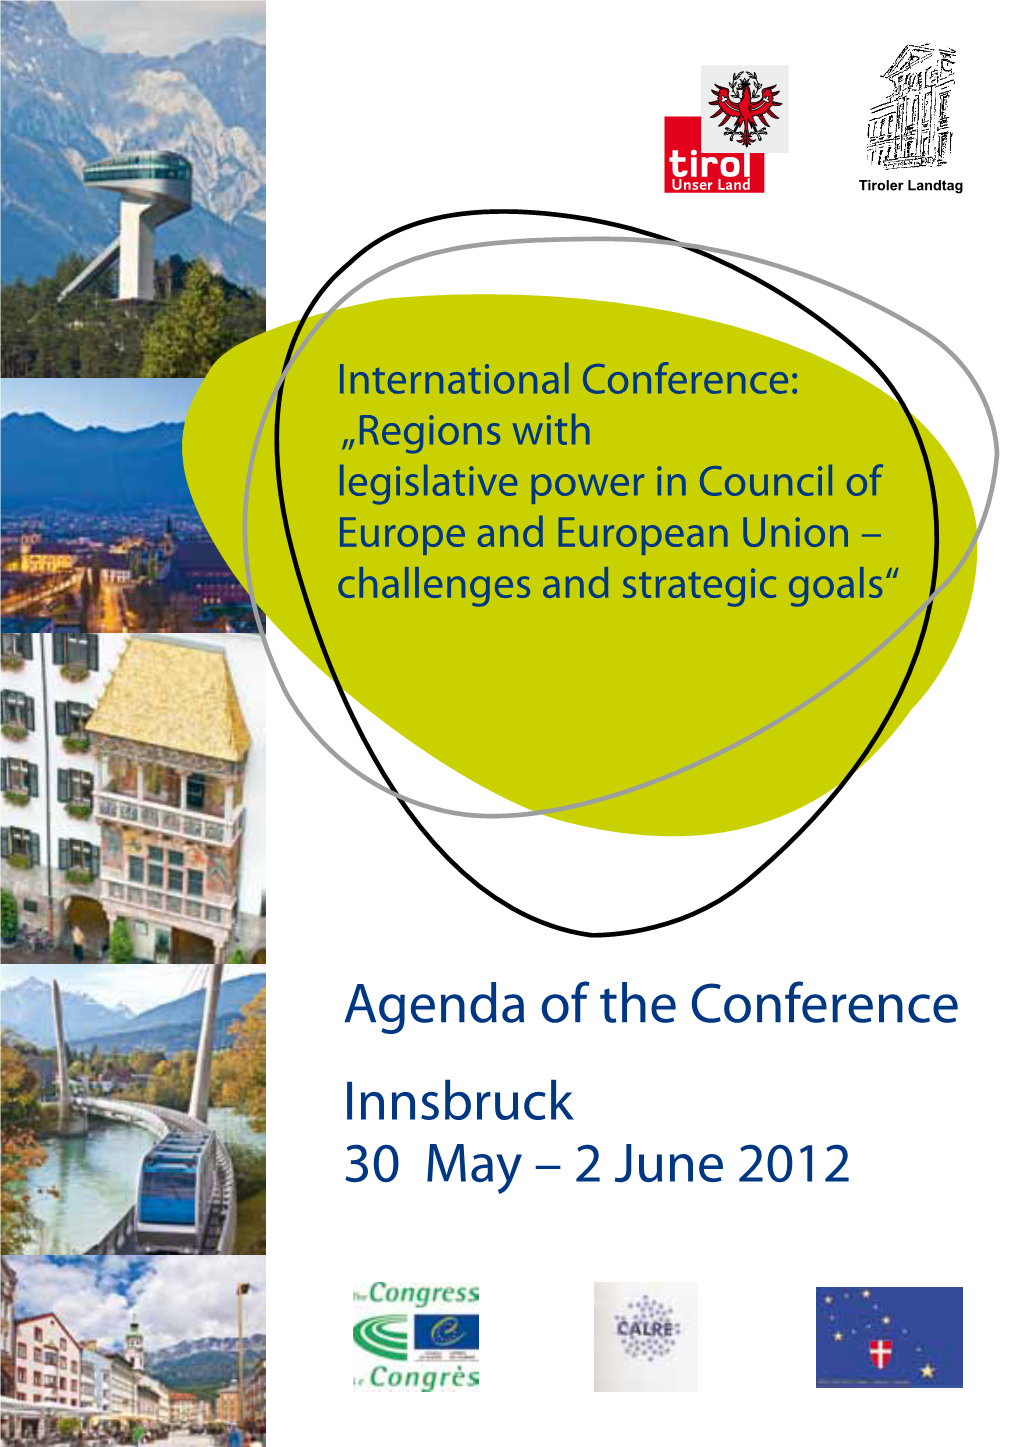 Agenda of the Conference Innsbruck 30 May – 2 June 2012